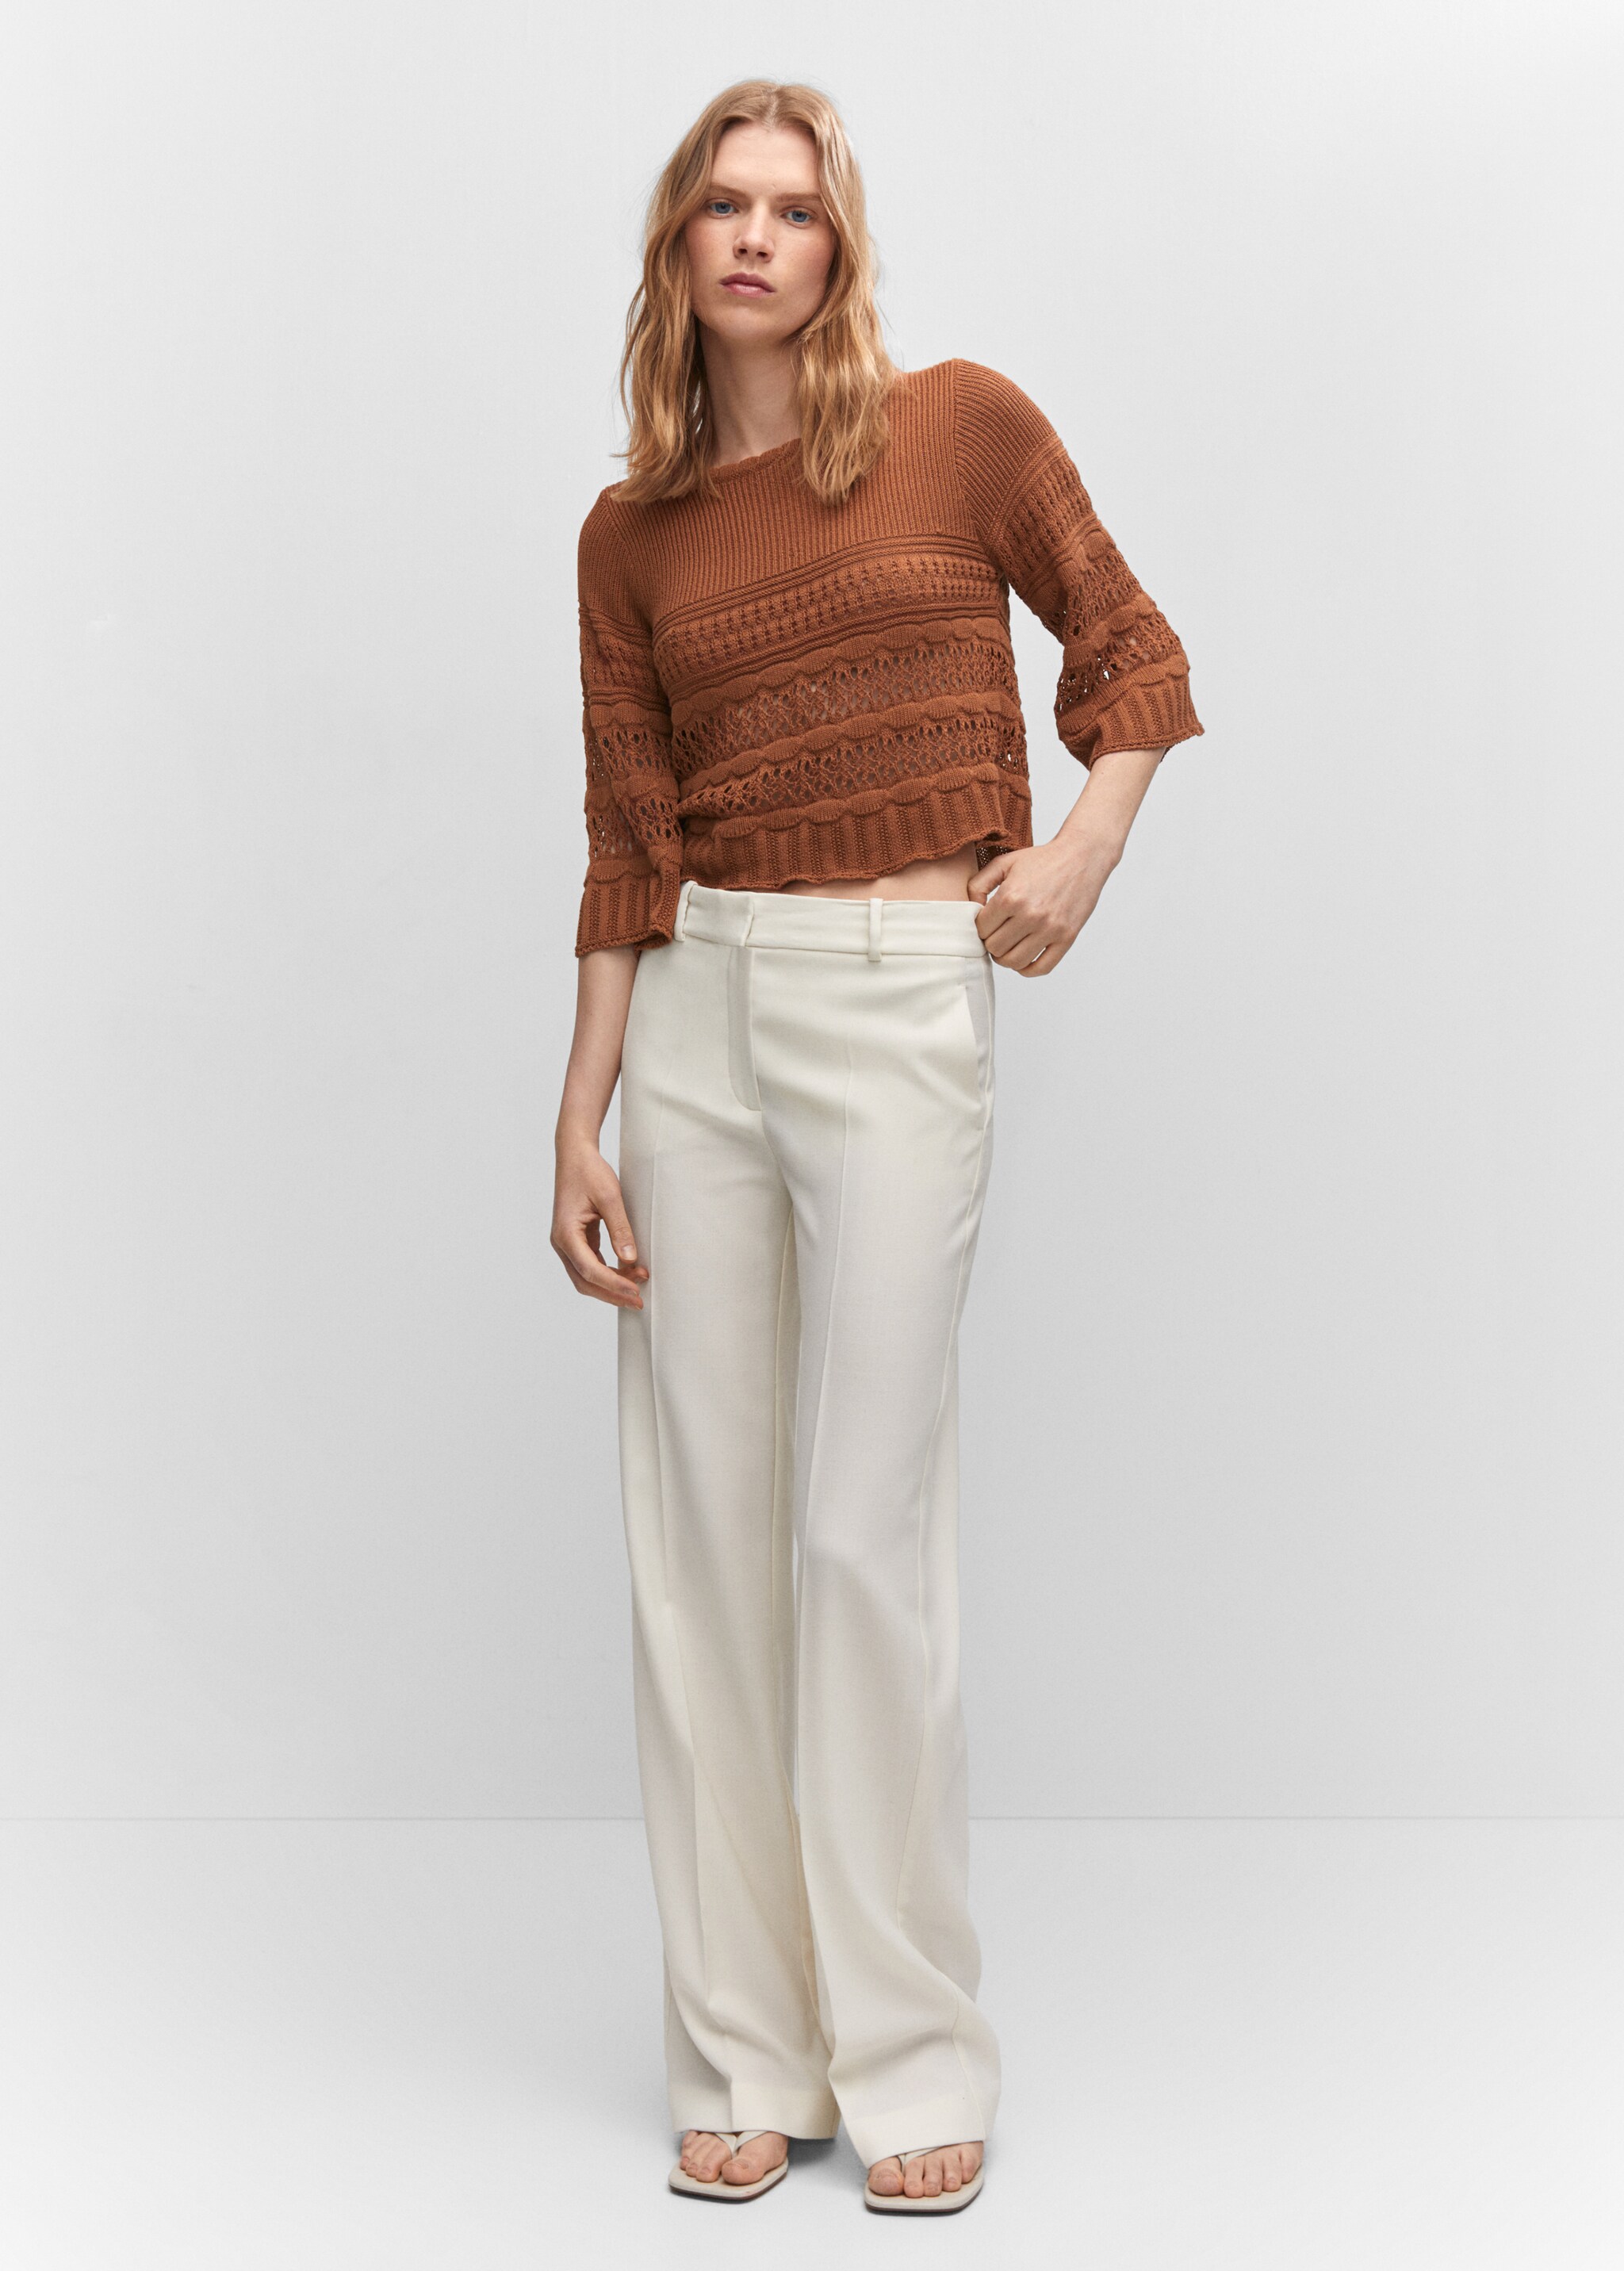 Openwork sweater with flared sleeves - General plane